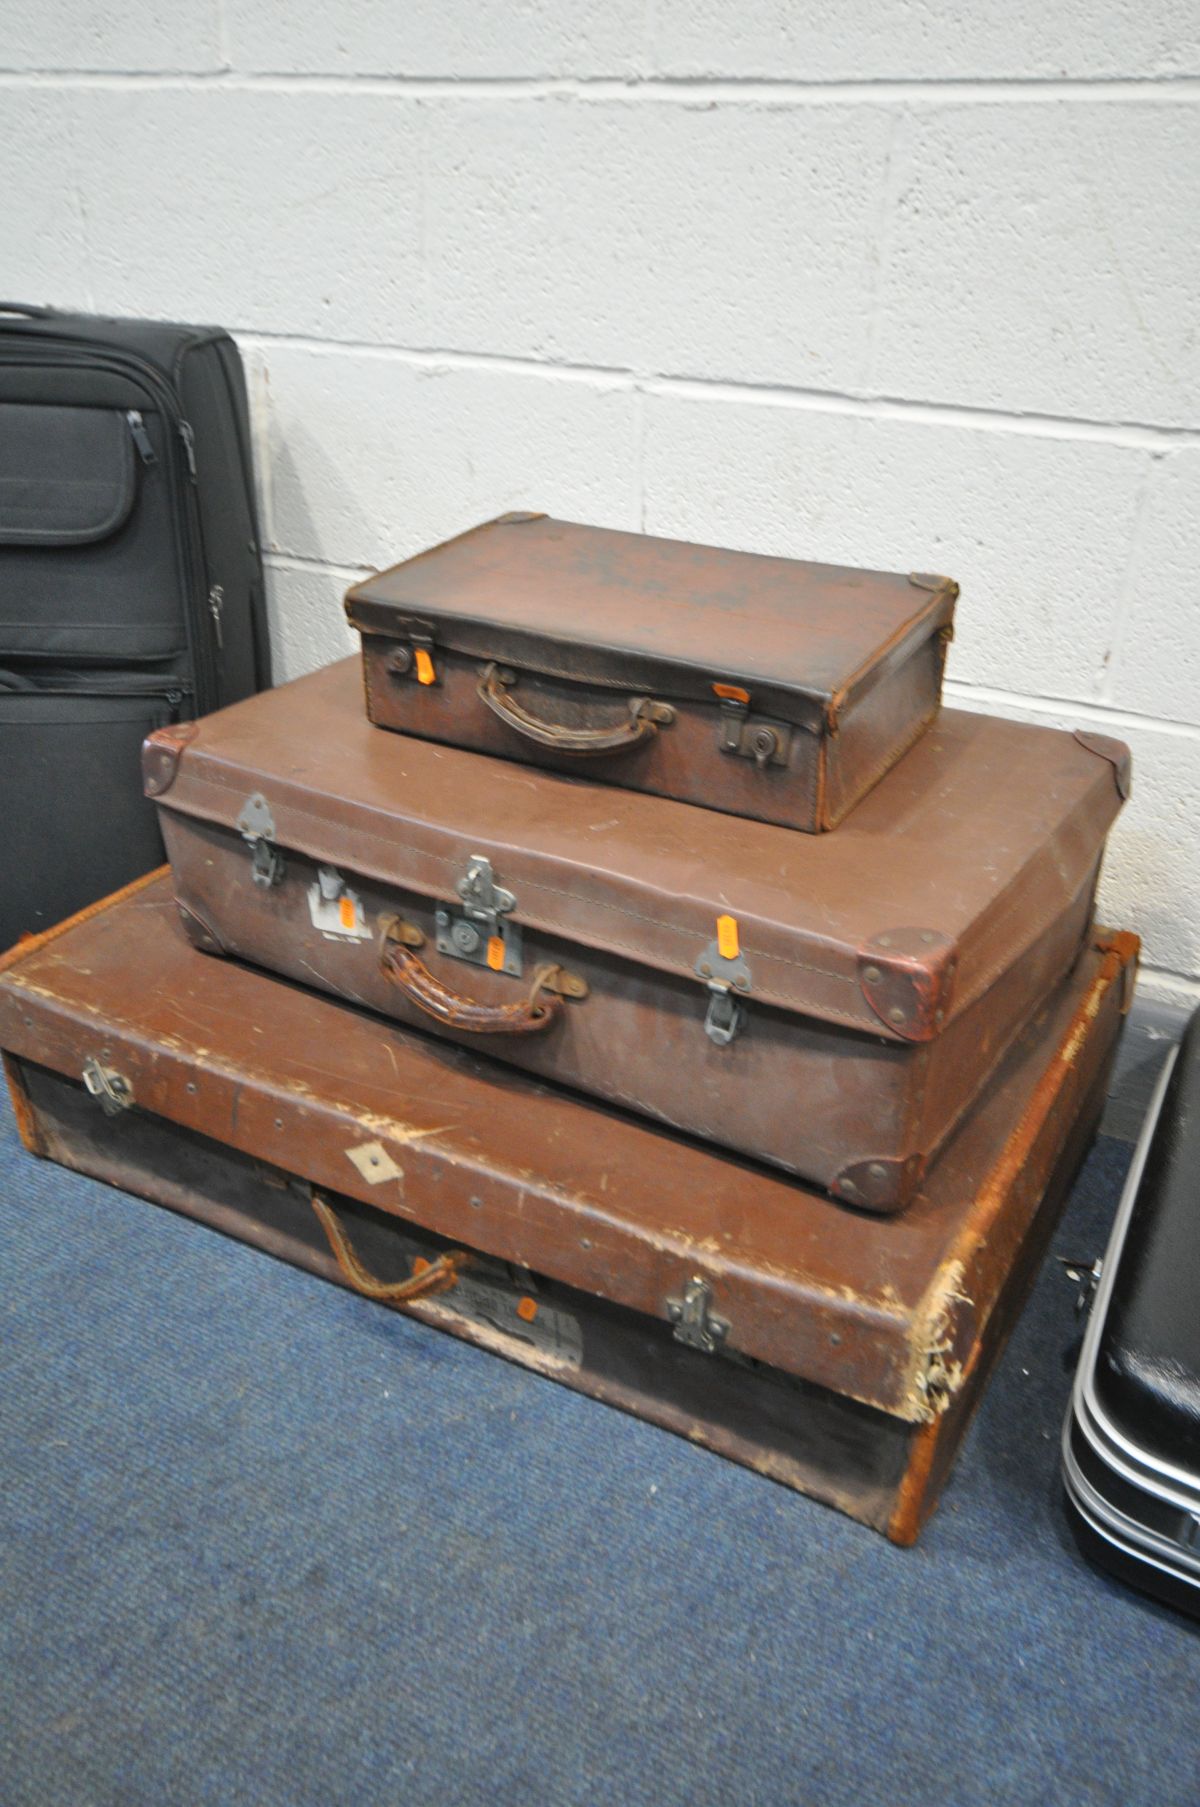 SEVEN VARIOUS SUITCASES, include three brown vintage suitcases, and a Mak's suitcase - Image 2 of 3